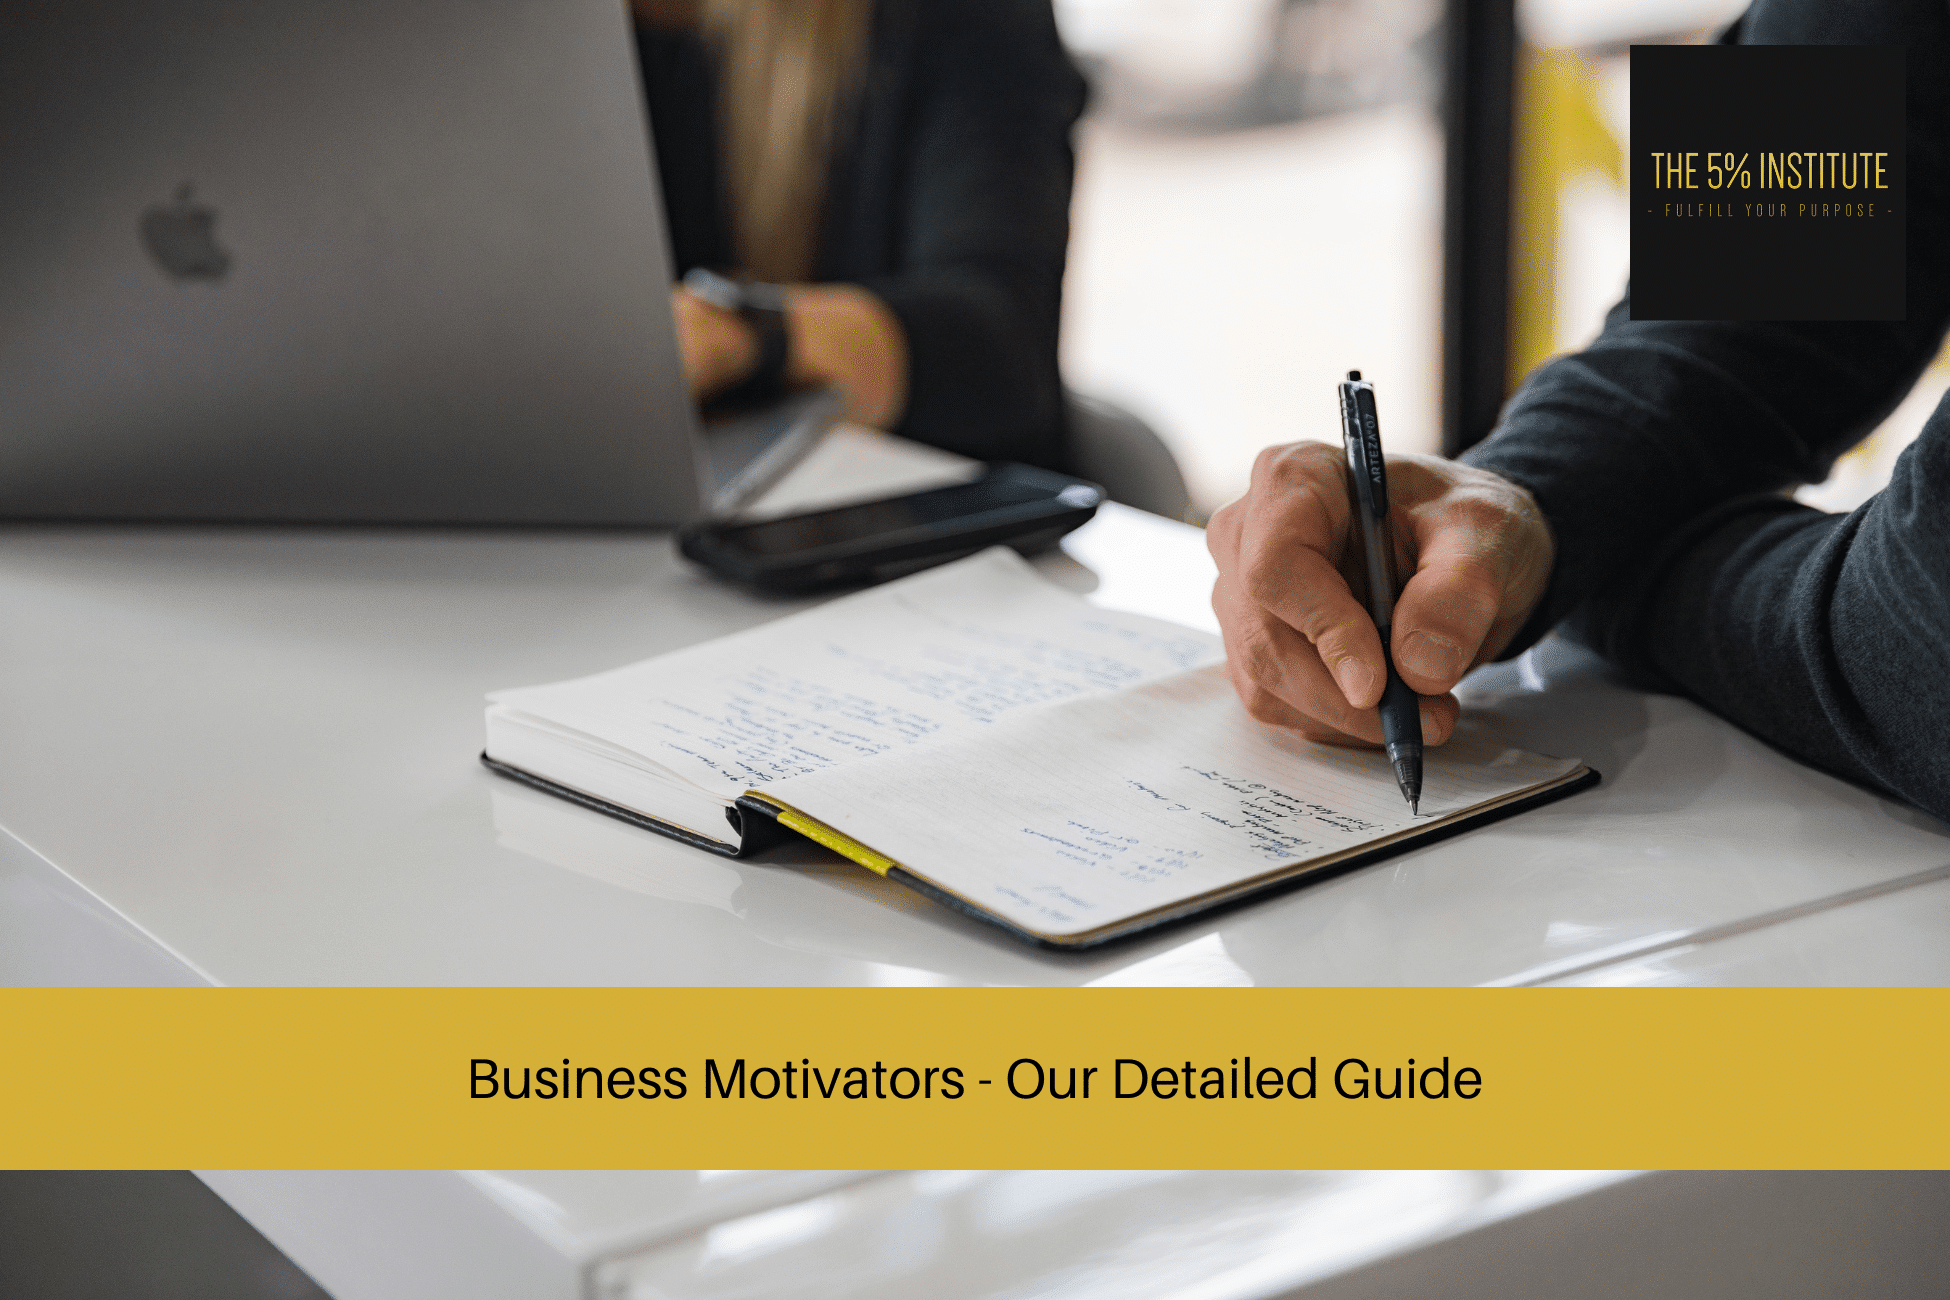 Business Motivators - Our Detailed Guide